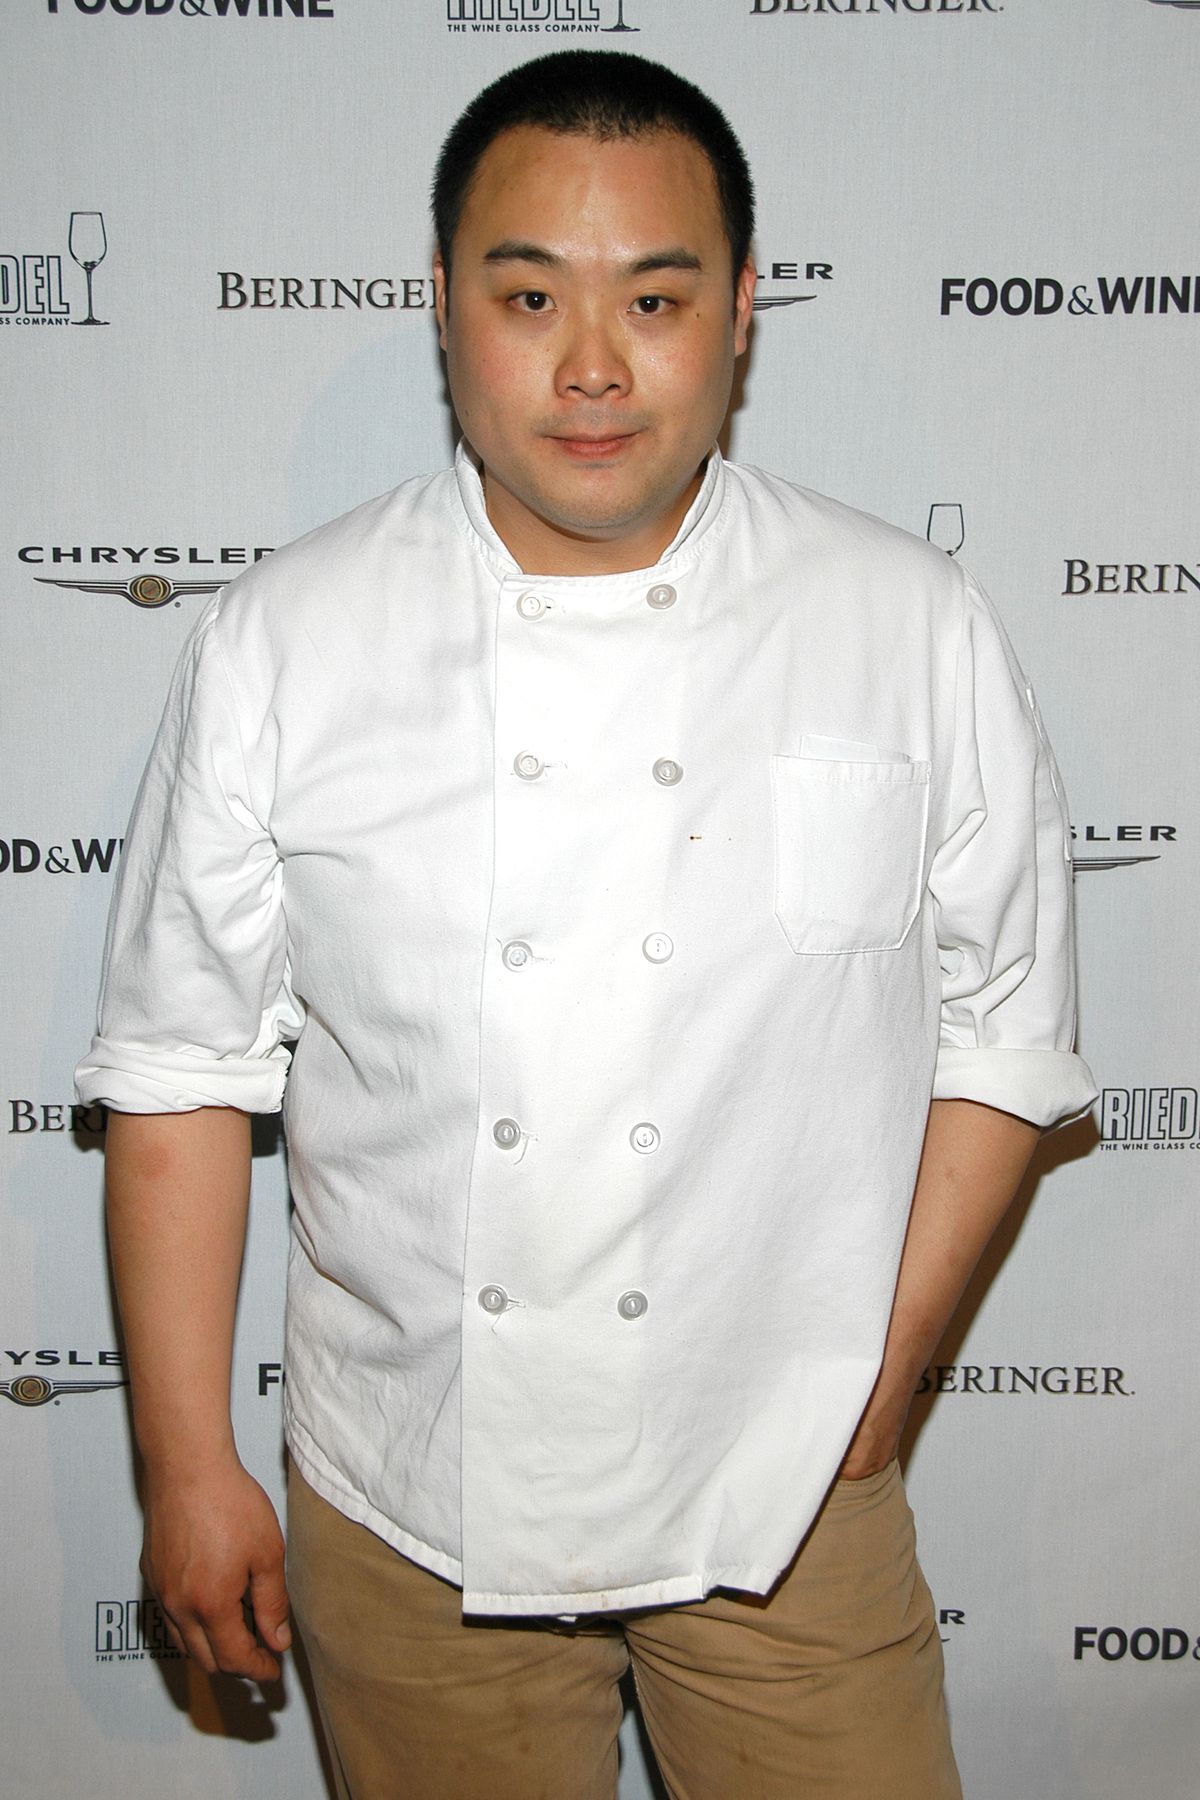 Chef David Chang, wearing a white chef’s shirt, stands in front of a backdrop at a Food and Wine event.